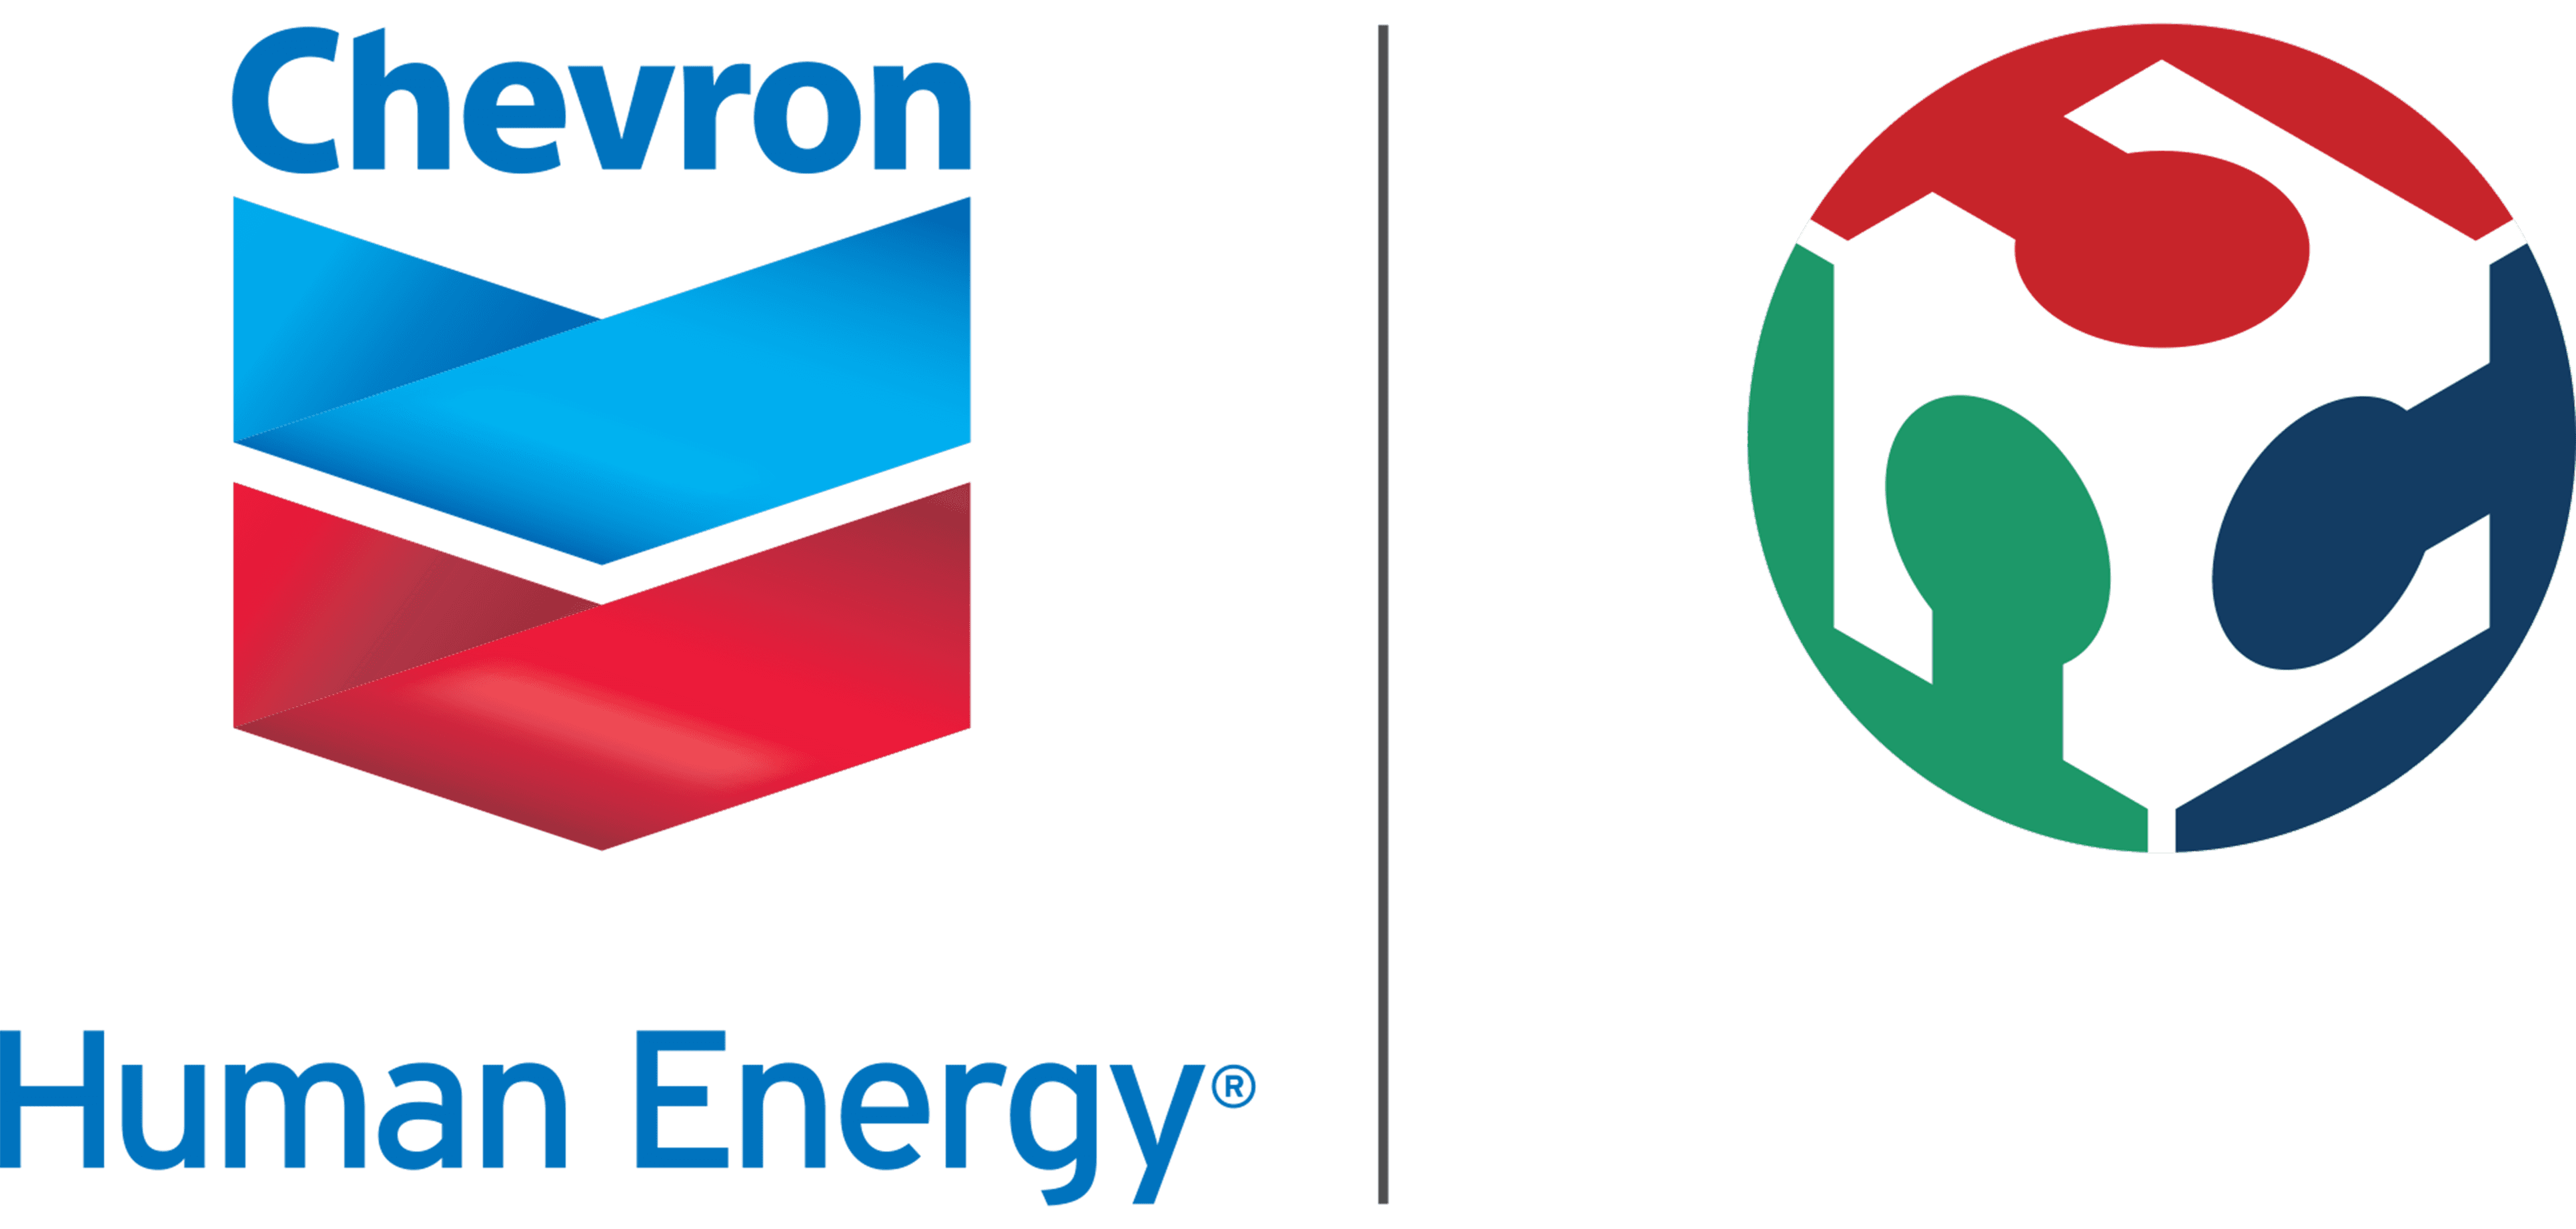 Chevron STEM Education Award Frequently Asked Questions